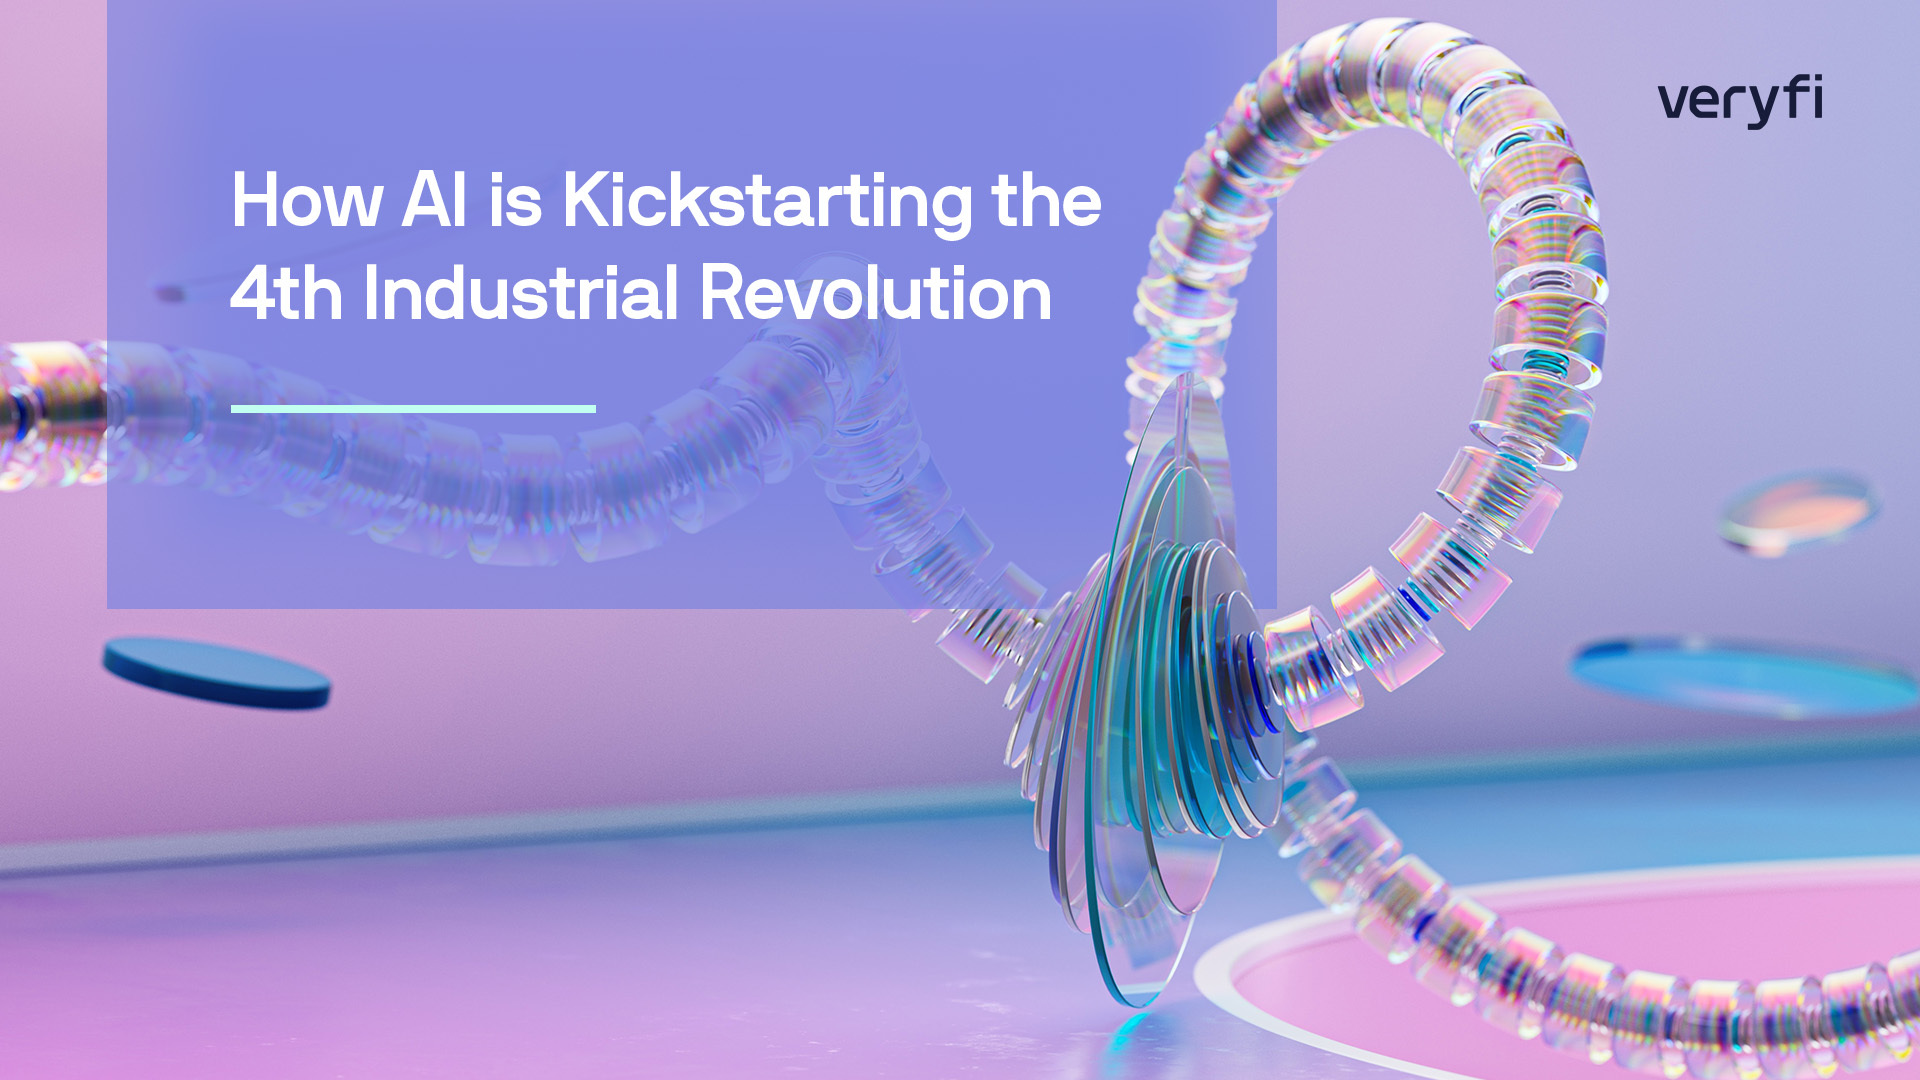 Robotic loop made of metal and plastic to symbolize the 4th Industrial Revolution